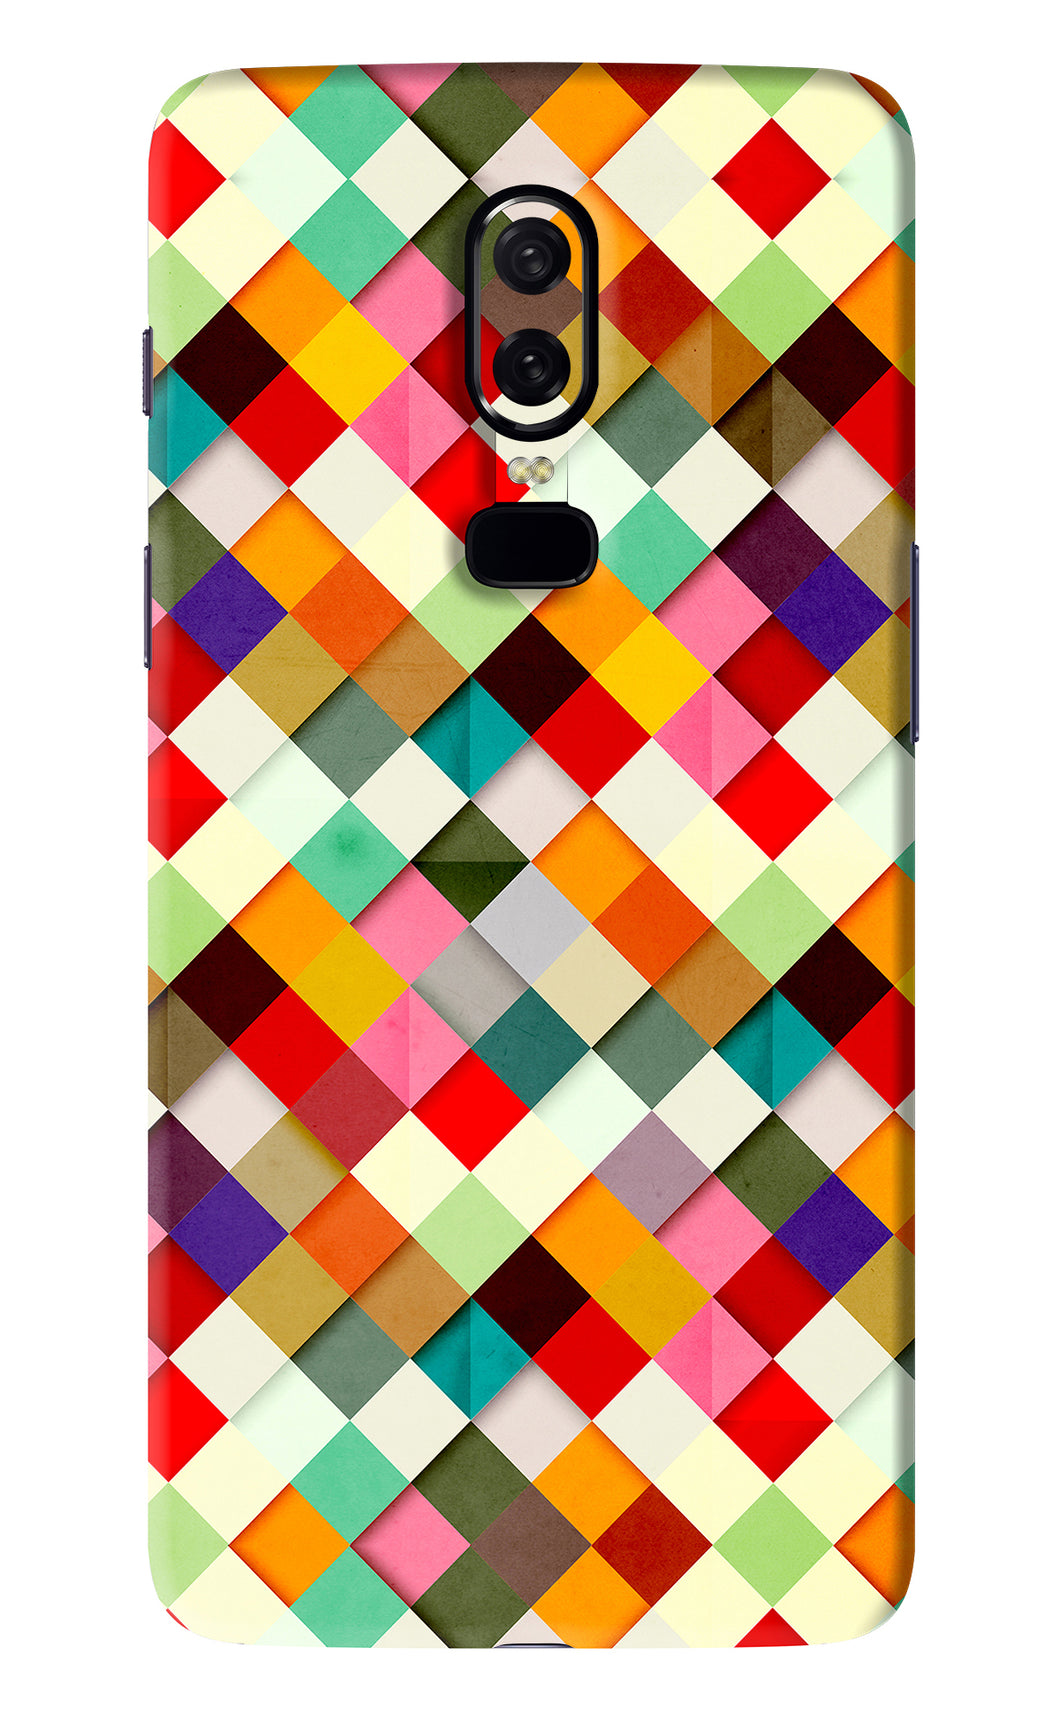 Geometric Abstract Colorful OnePlus 6 Back Skin Wrap